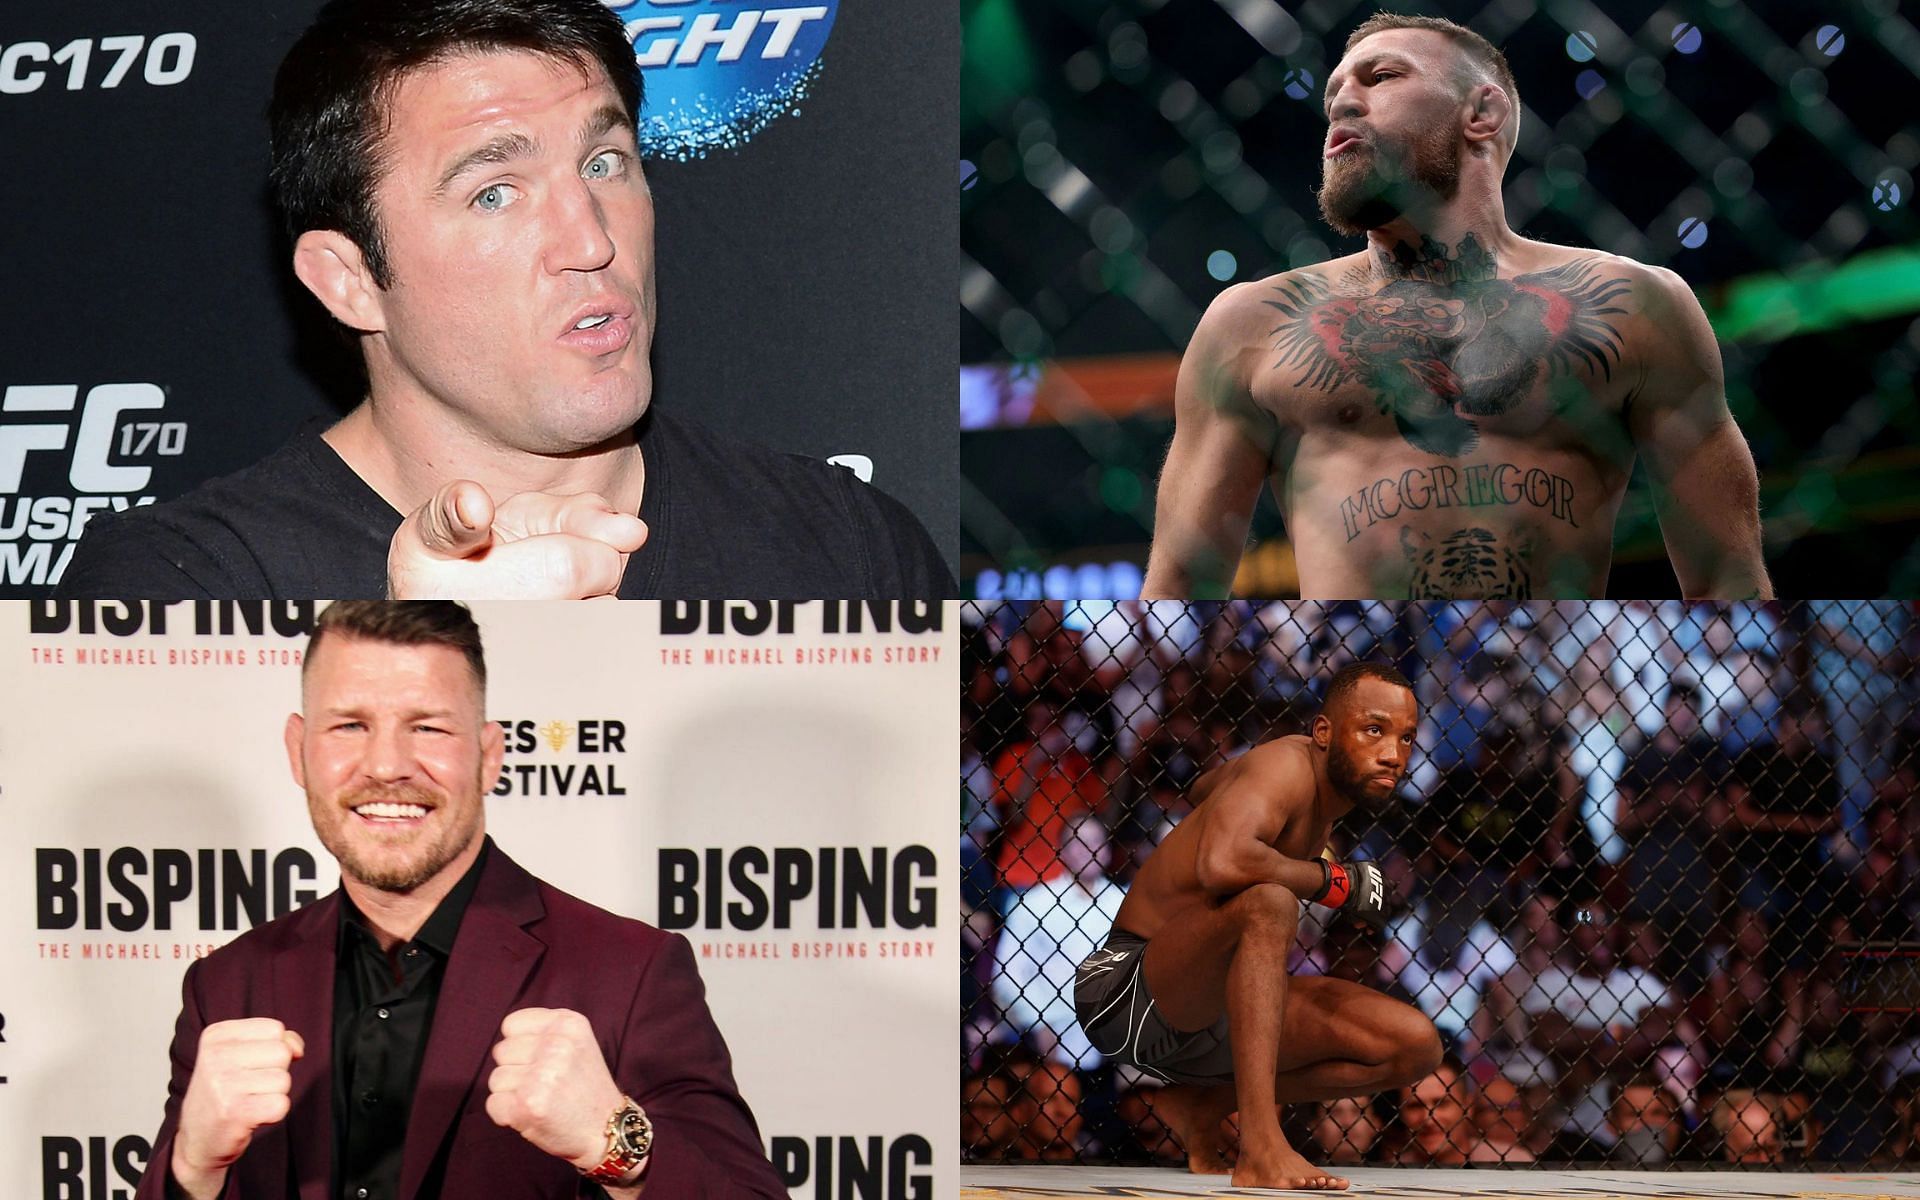 Chael Sonnen (top left), Conor McGregor (top right), Michael Bisping (bottom left), and Leon Edwards (bottom right) (images courtesy of Getty and @bisping Instagram)